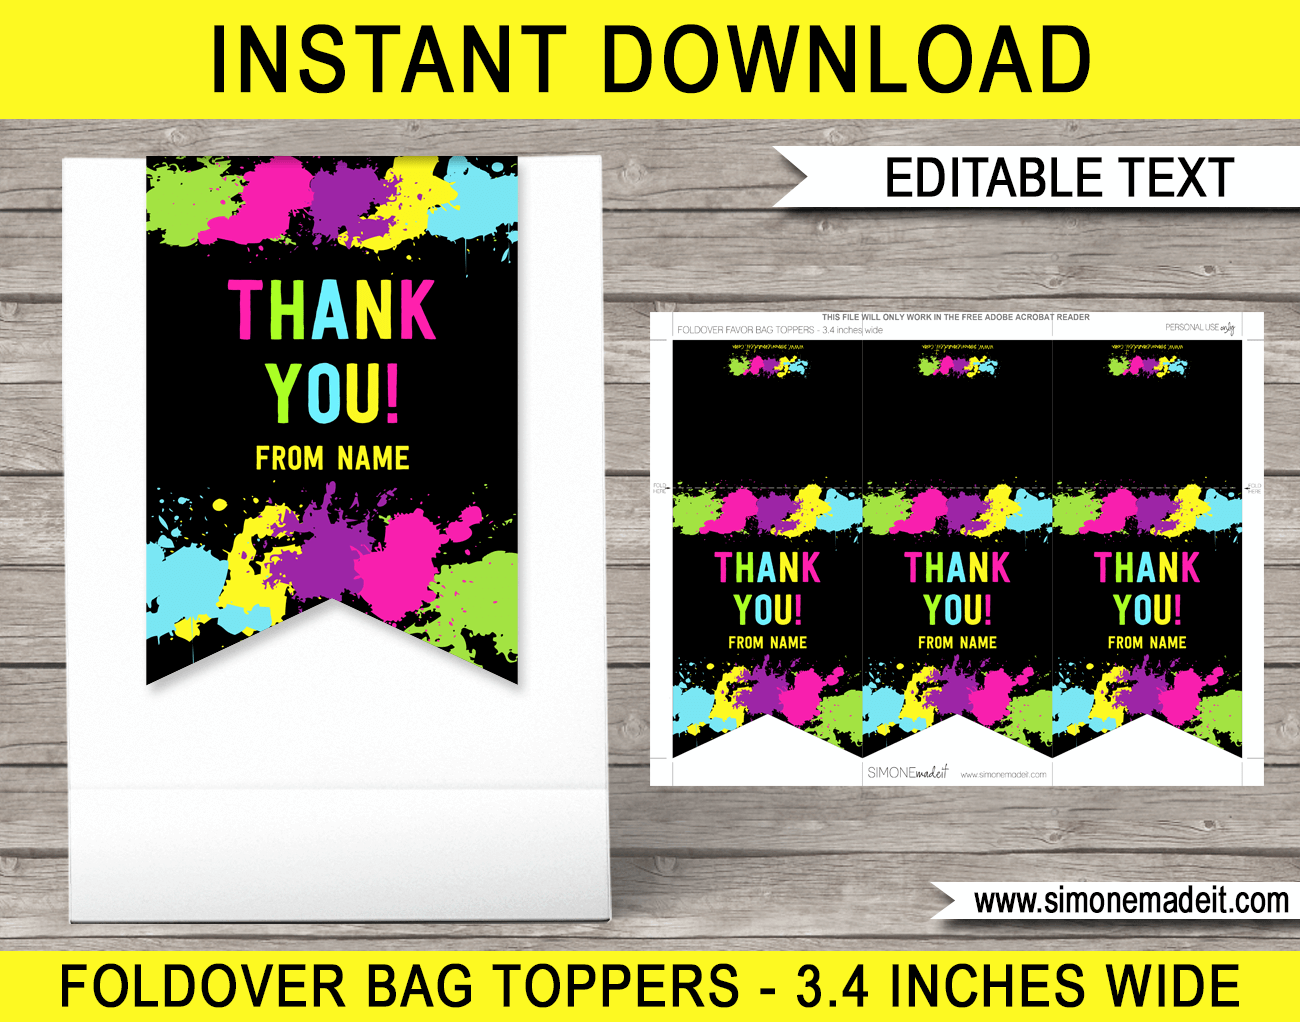 Neon Glow Party Favor Tag - Foldover Toppers - Thank You Tags - Neon Theme Birthday Party - Editable & Printable DIY Template - INSTANT DOWNLOAD via simonemadeit.com